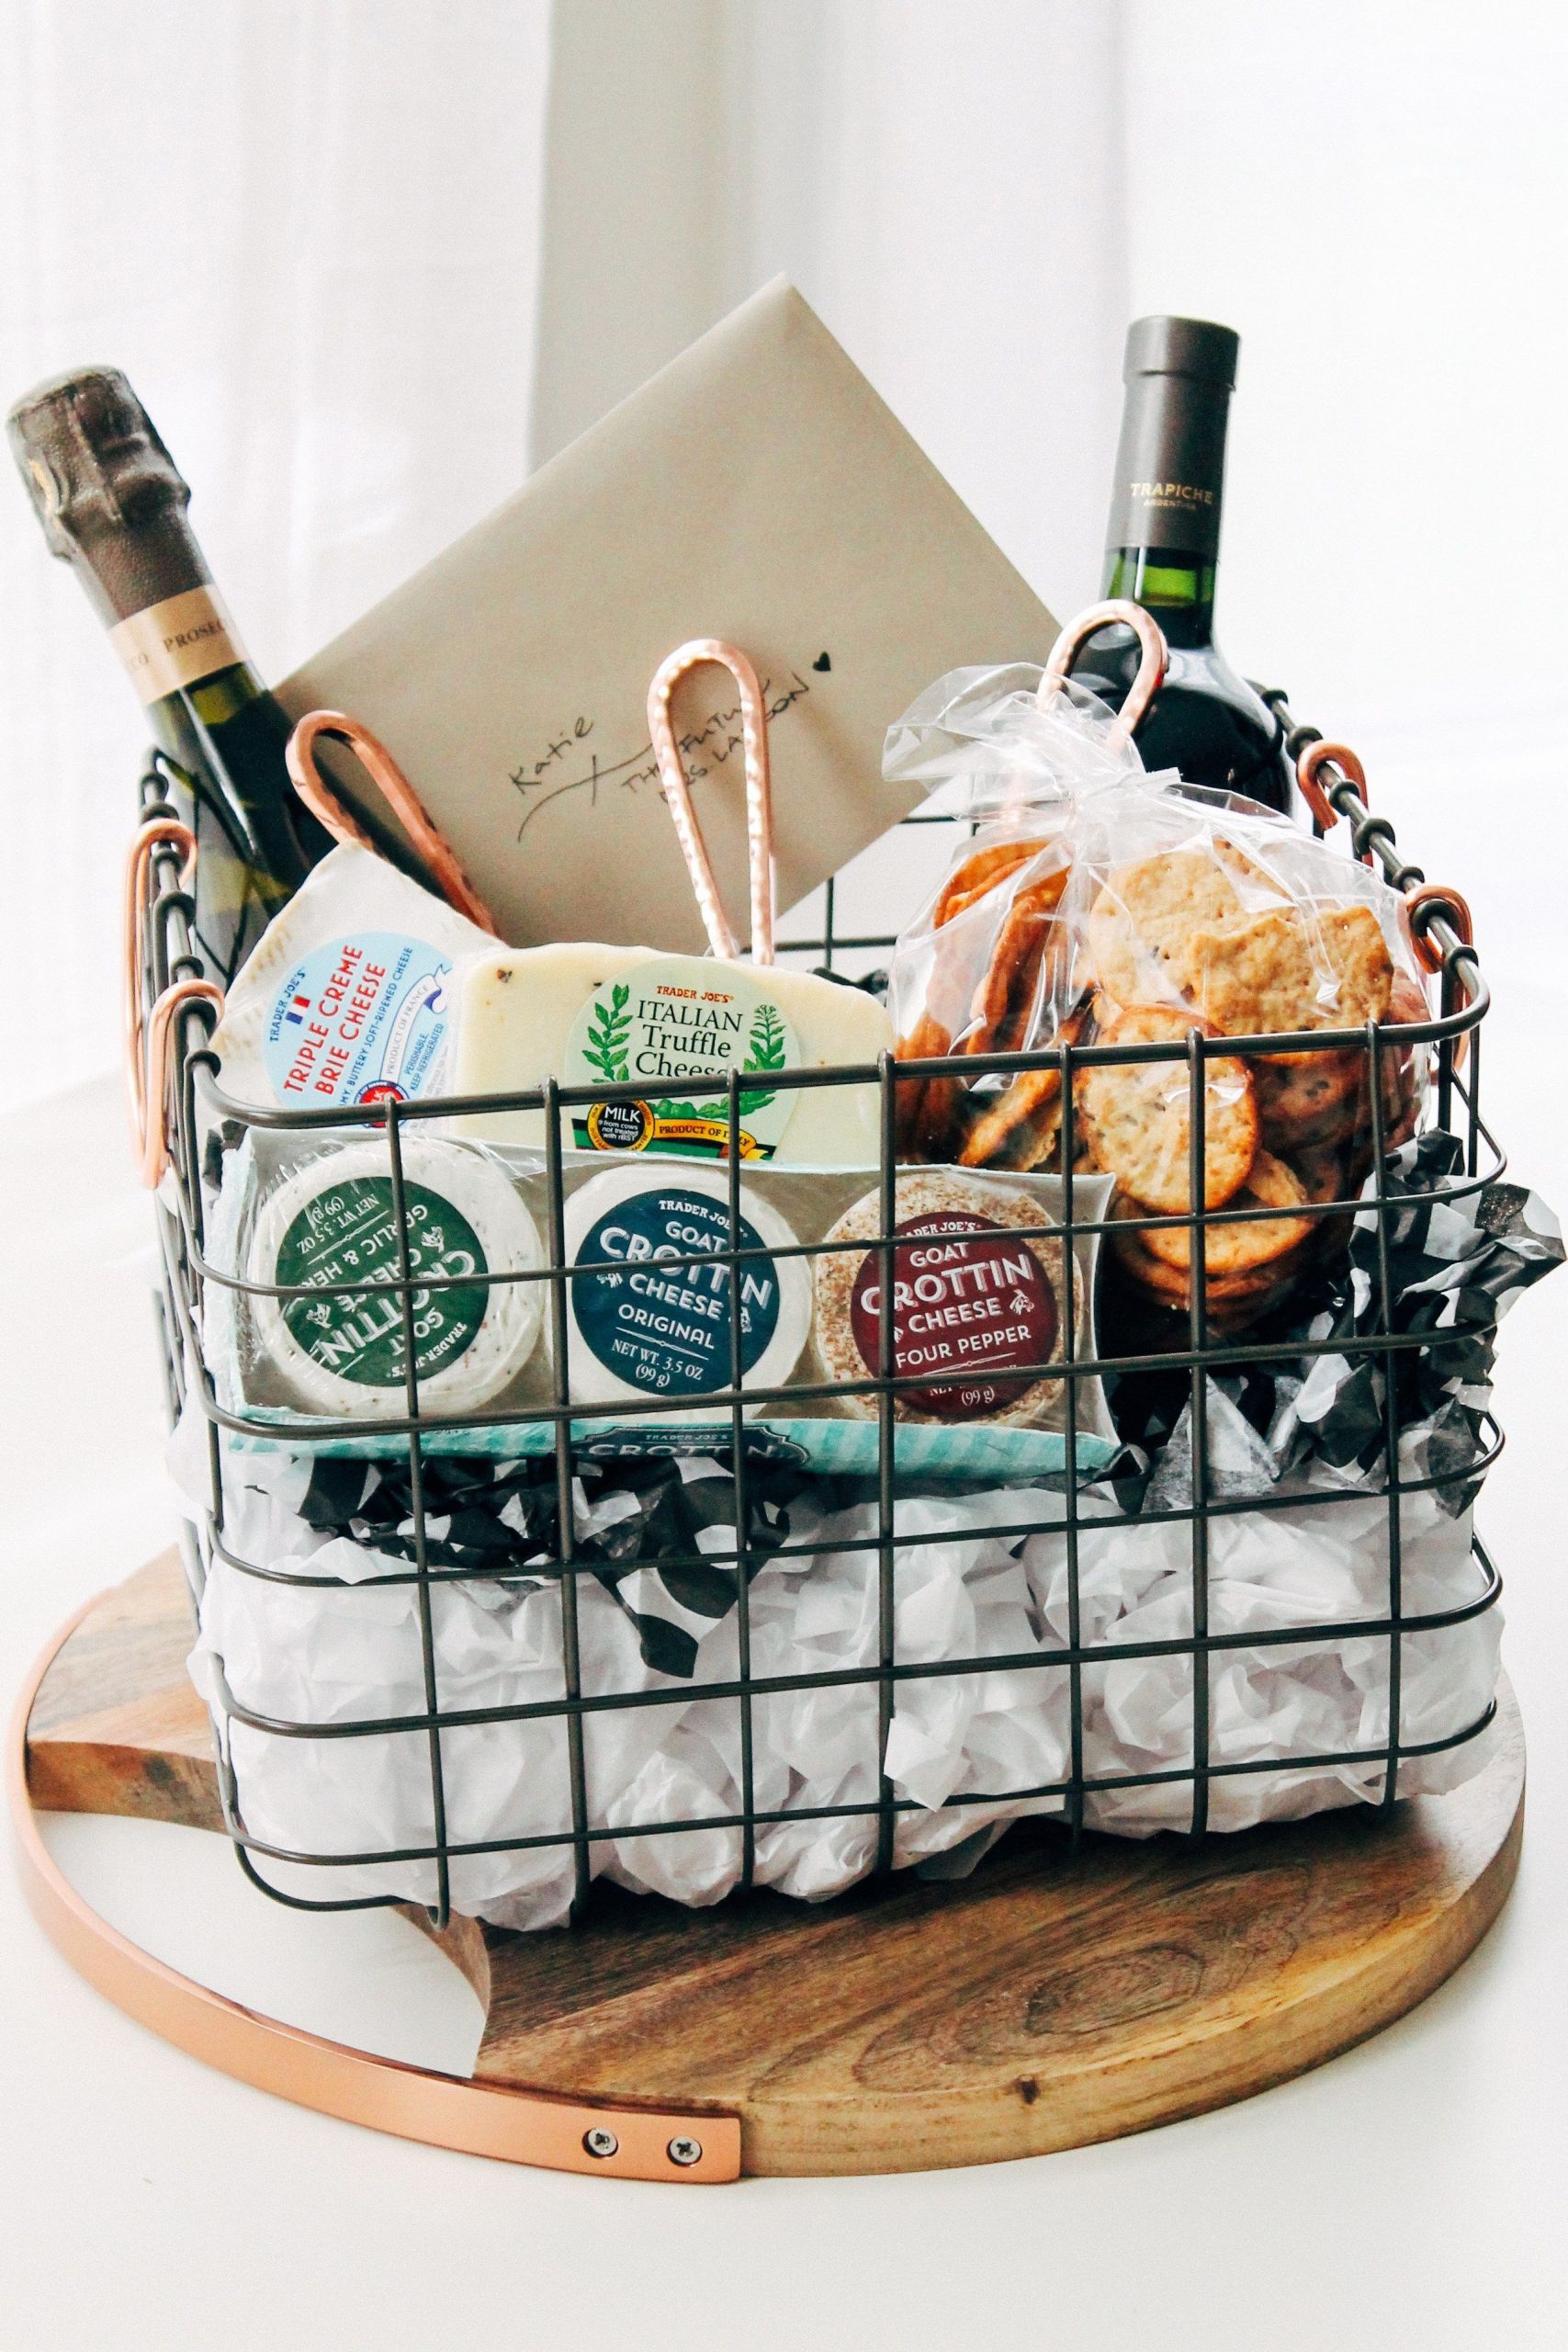 How To Make A Wine Gift Basket Ideas
 the ultimate cheese t basket playswellwithbutter